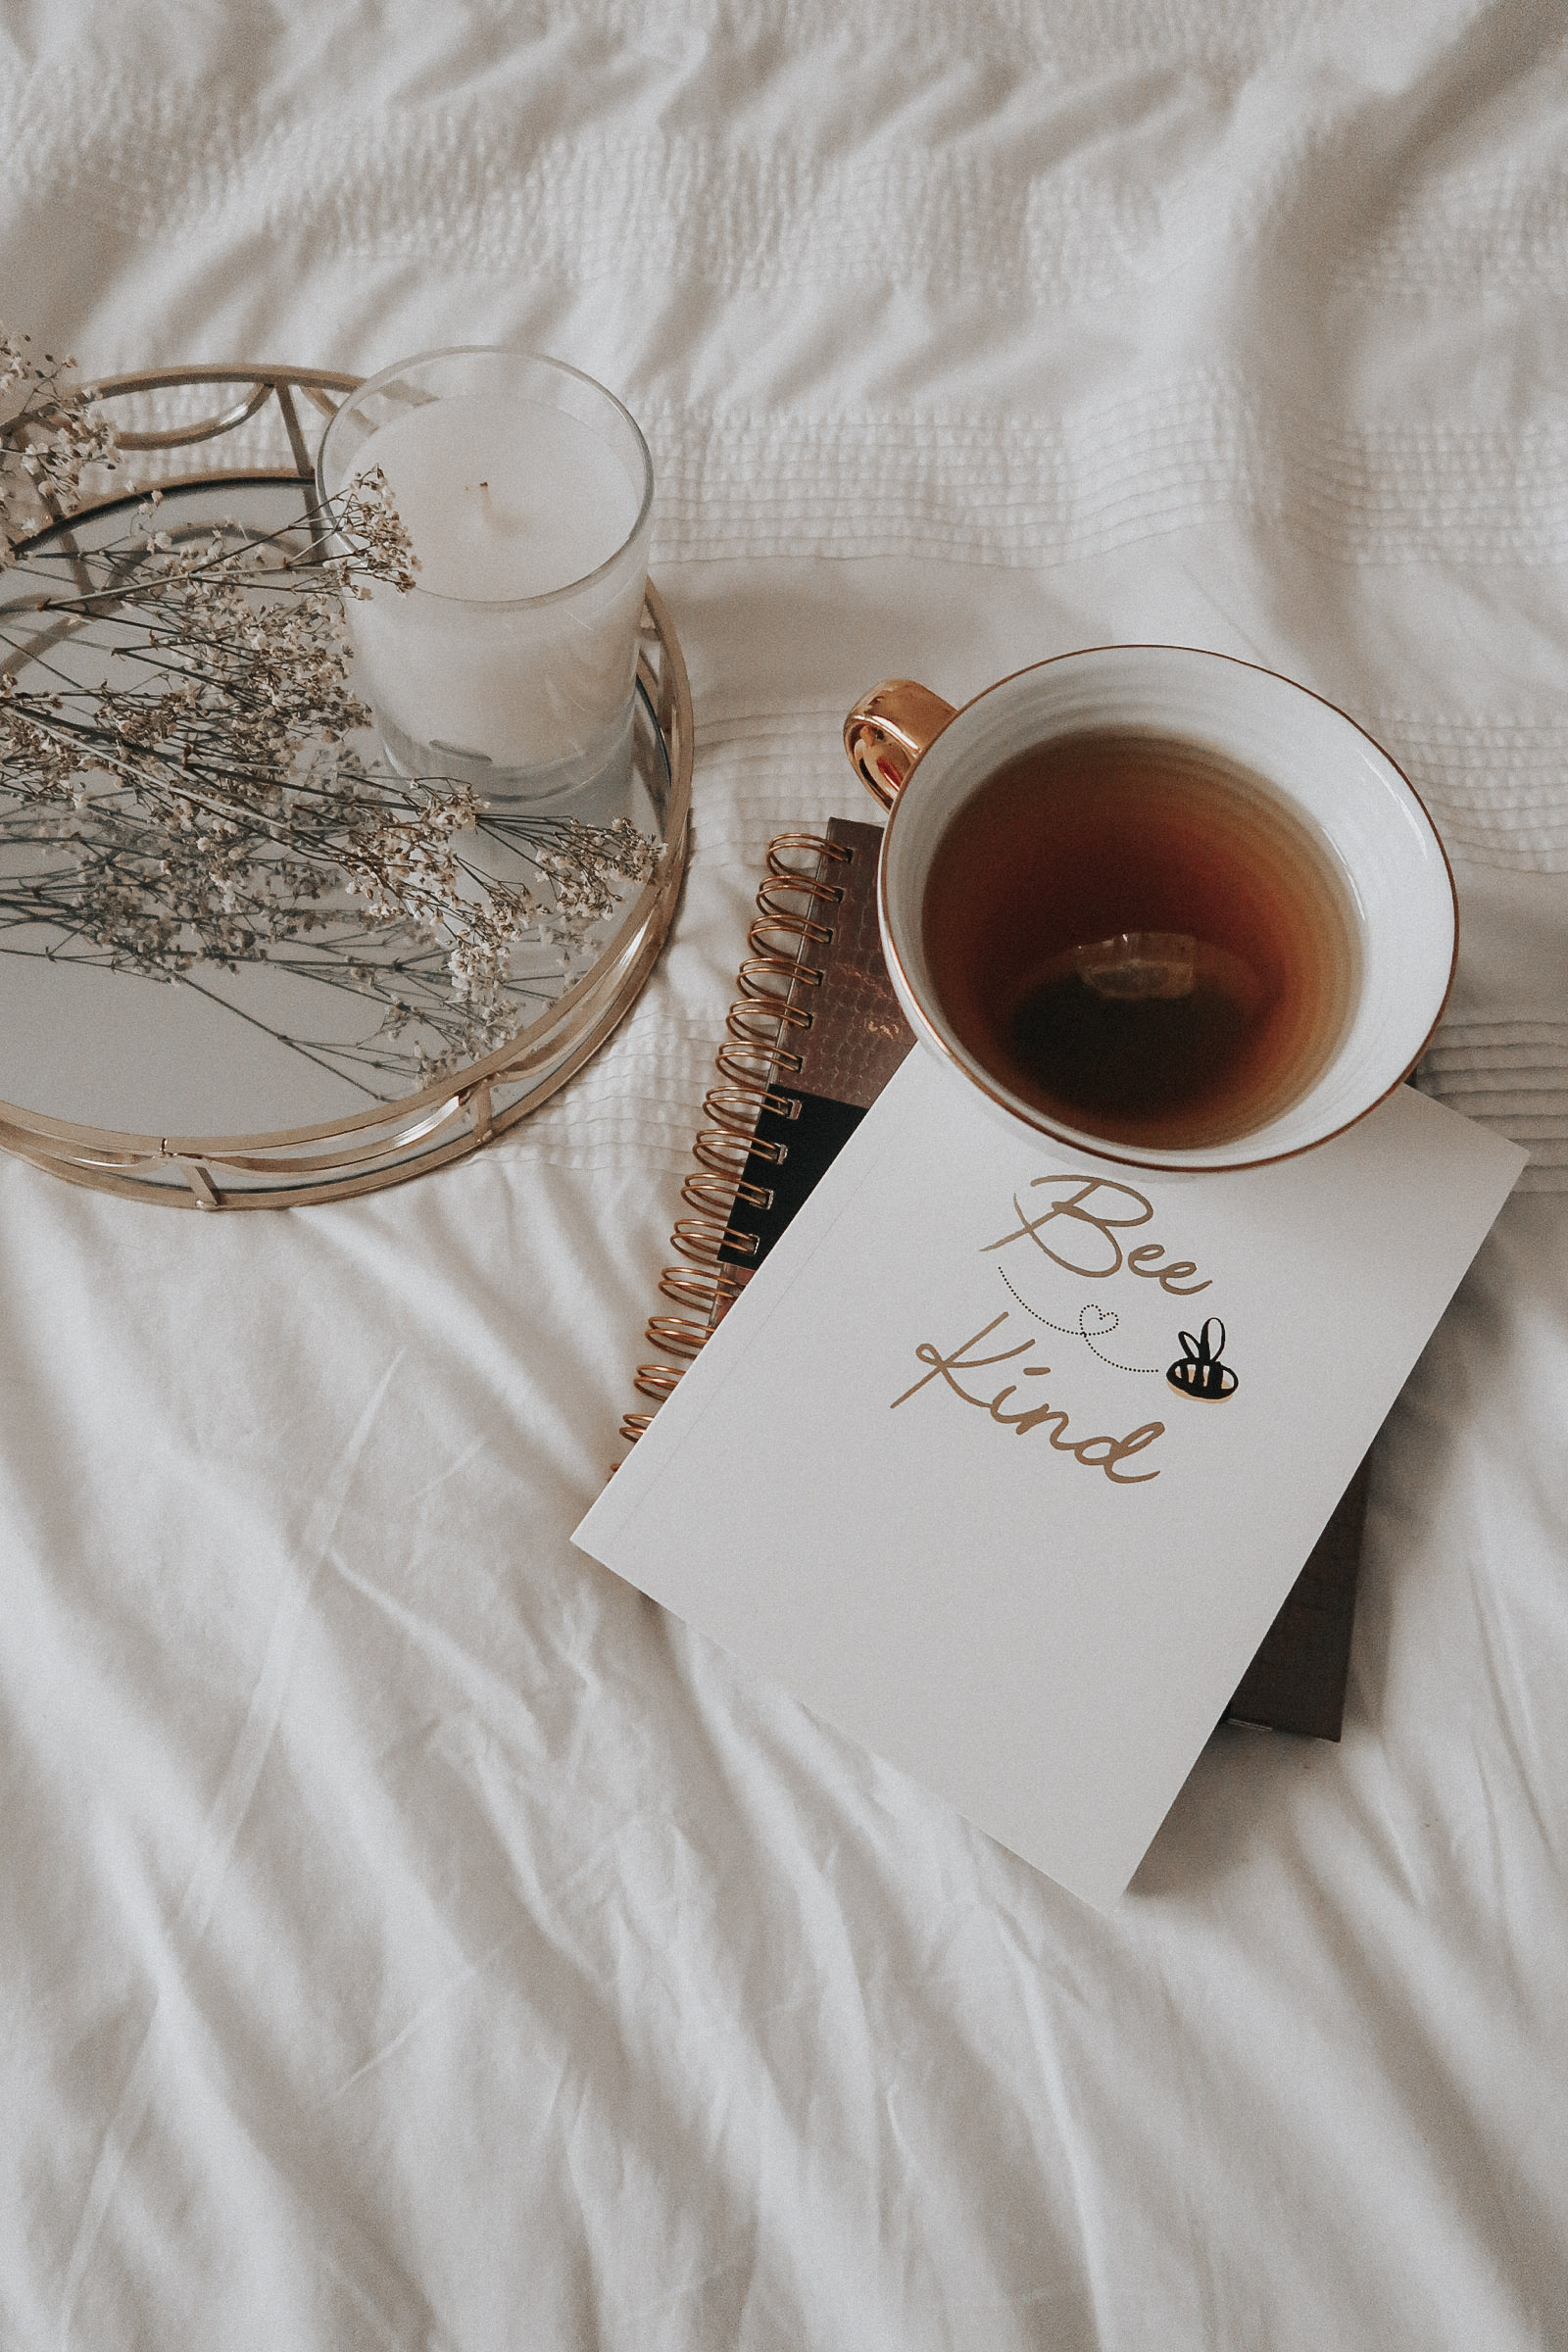 A flatlay of a notebook and white mug.